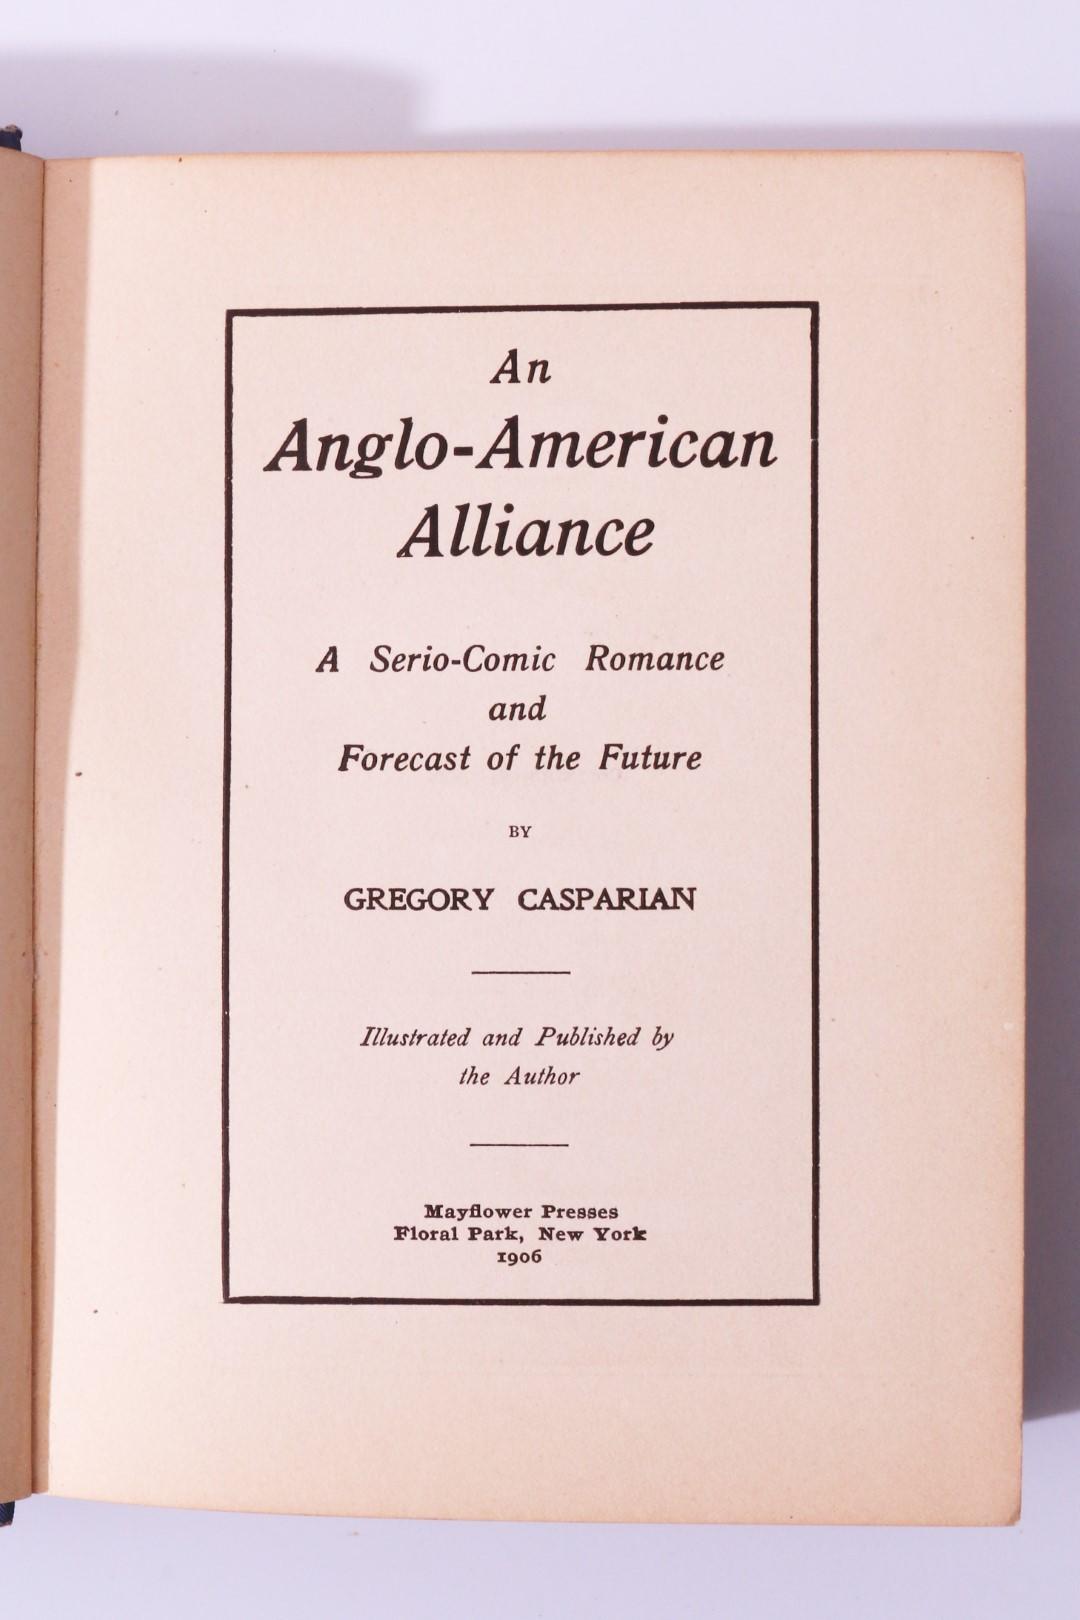 Gregory Casparian - An Anglo-American Alliance: A Serio-Comic Romance and Forecast of the Future - Mayflower Press, 1906, First Edition.